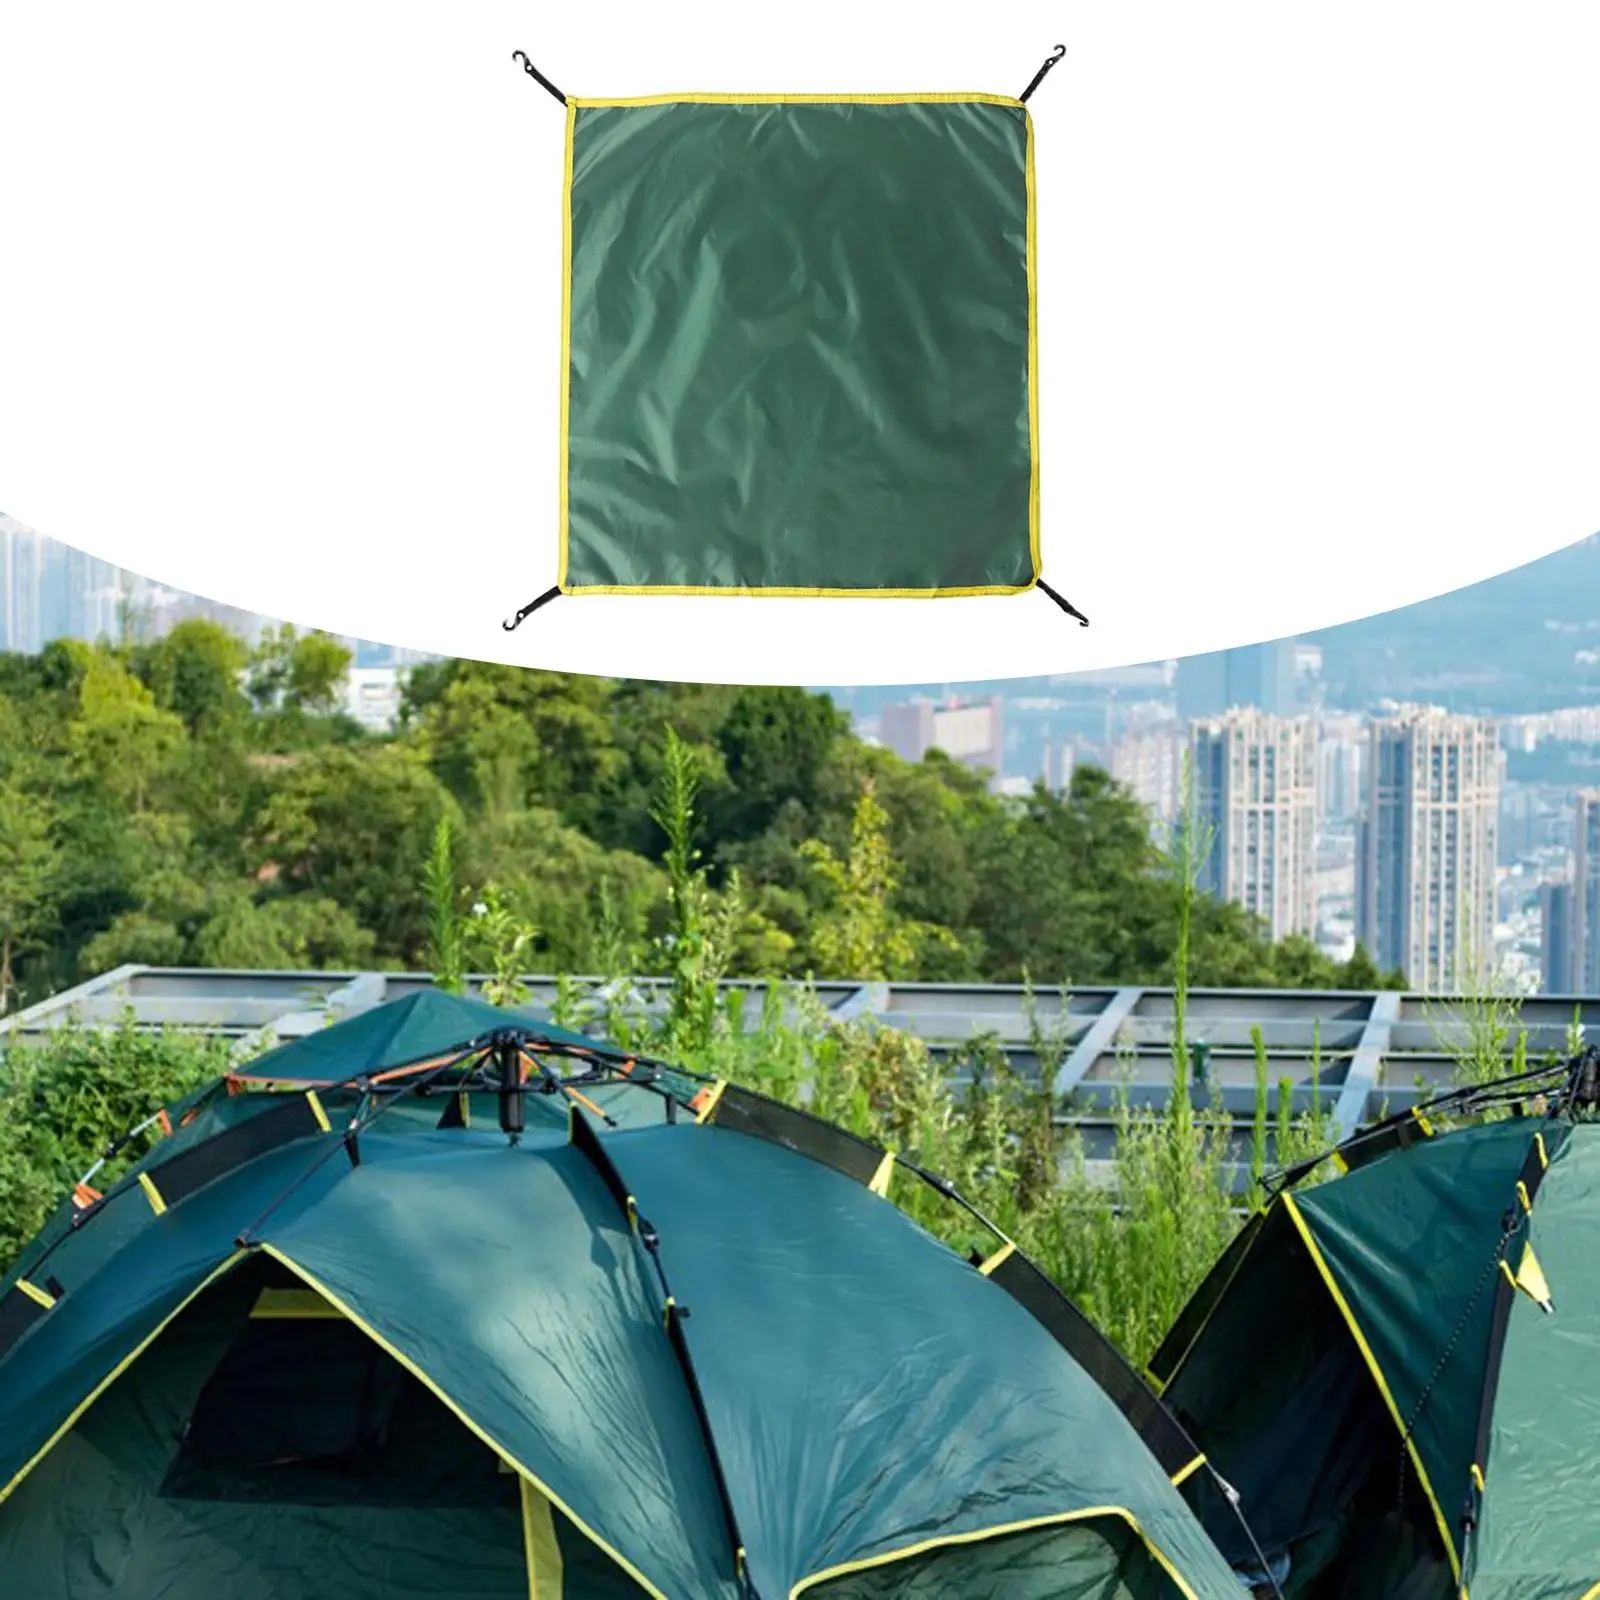 Attachment : Fits 3-4 Person Instant Tents (3.6ft X 3.6ft), for Tent Only,